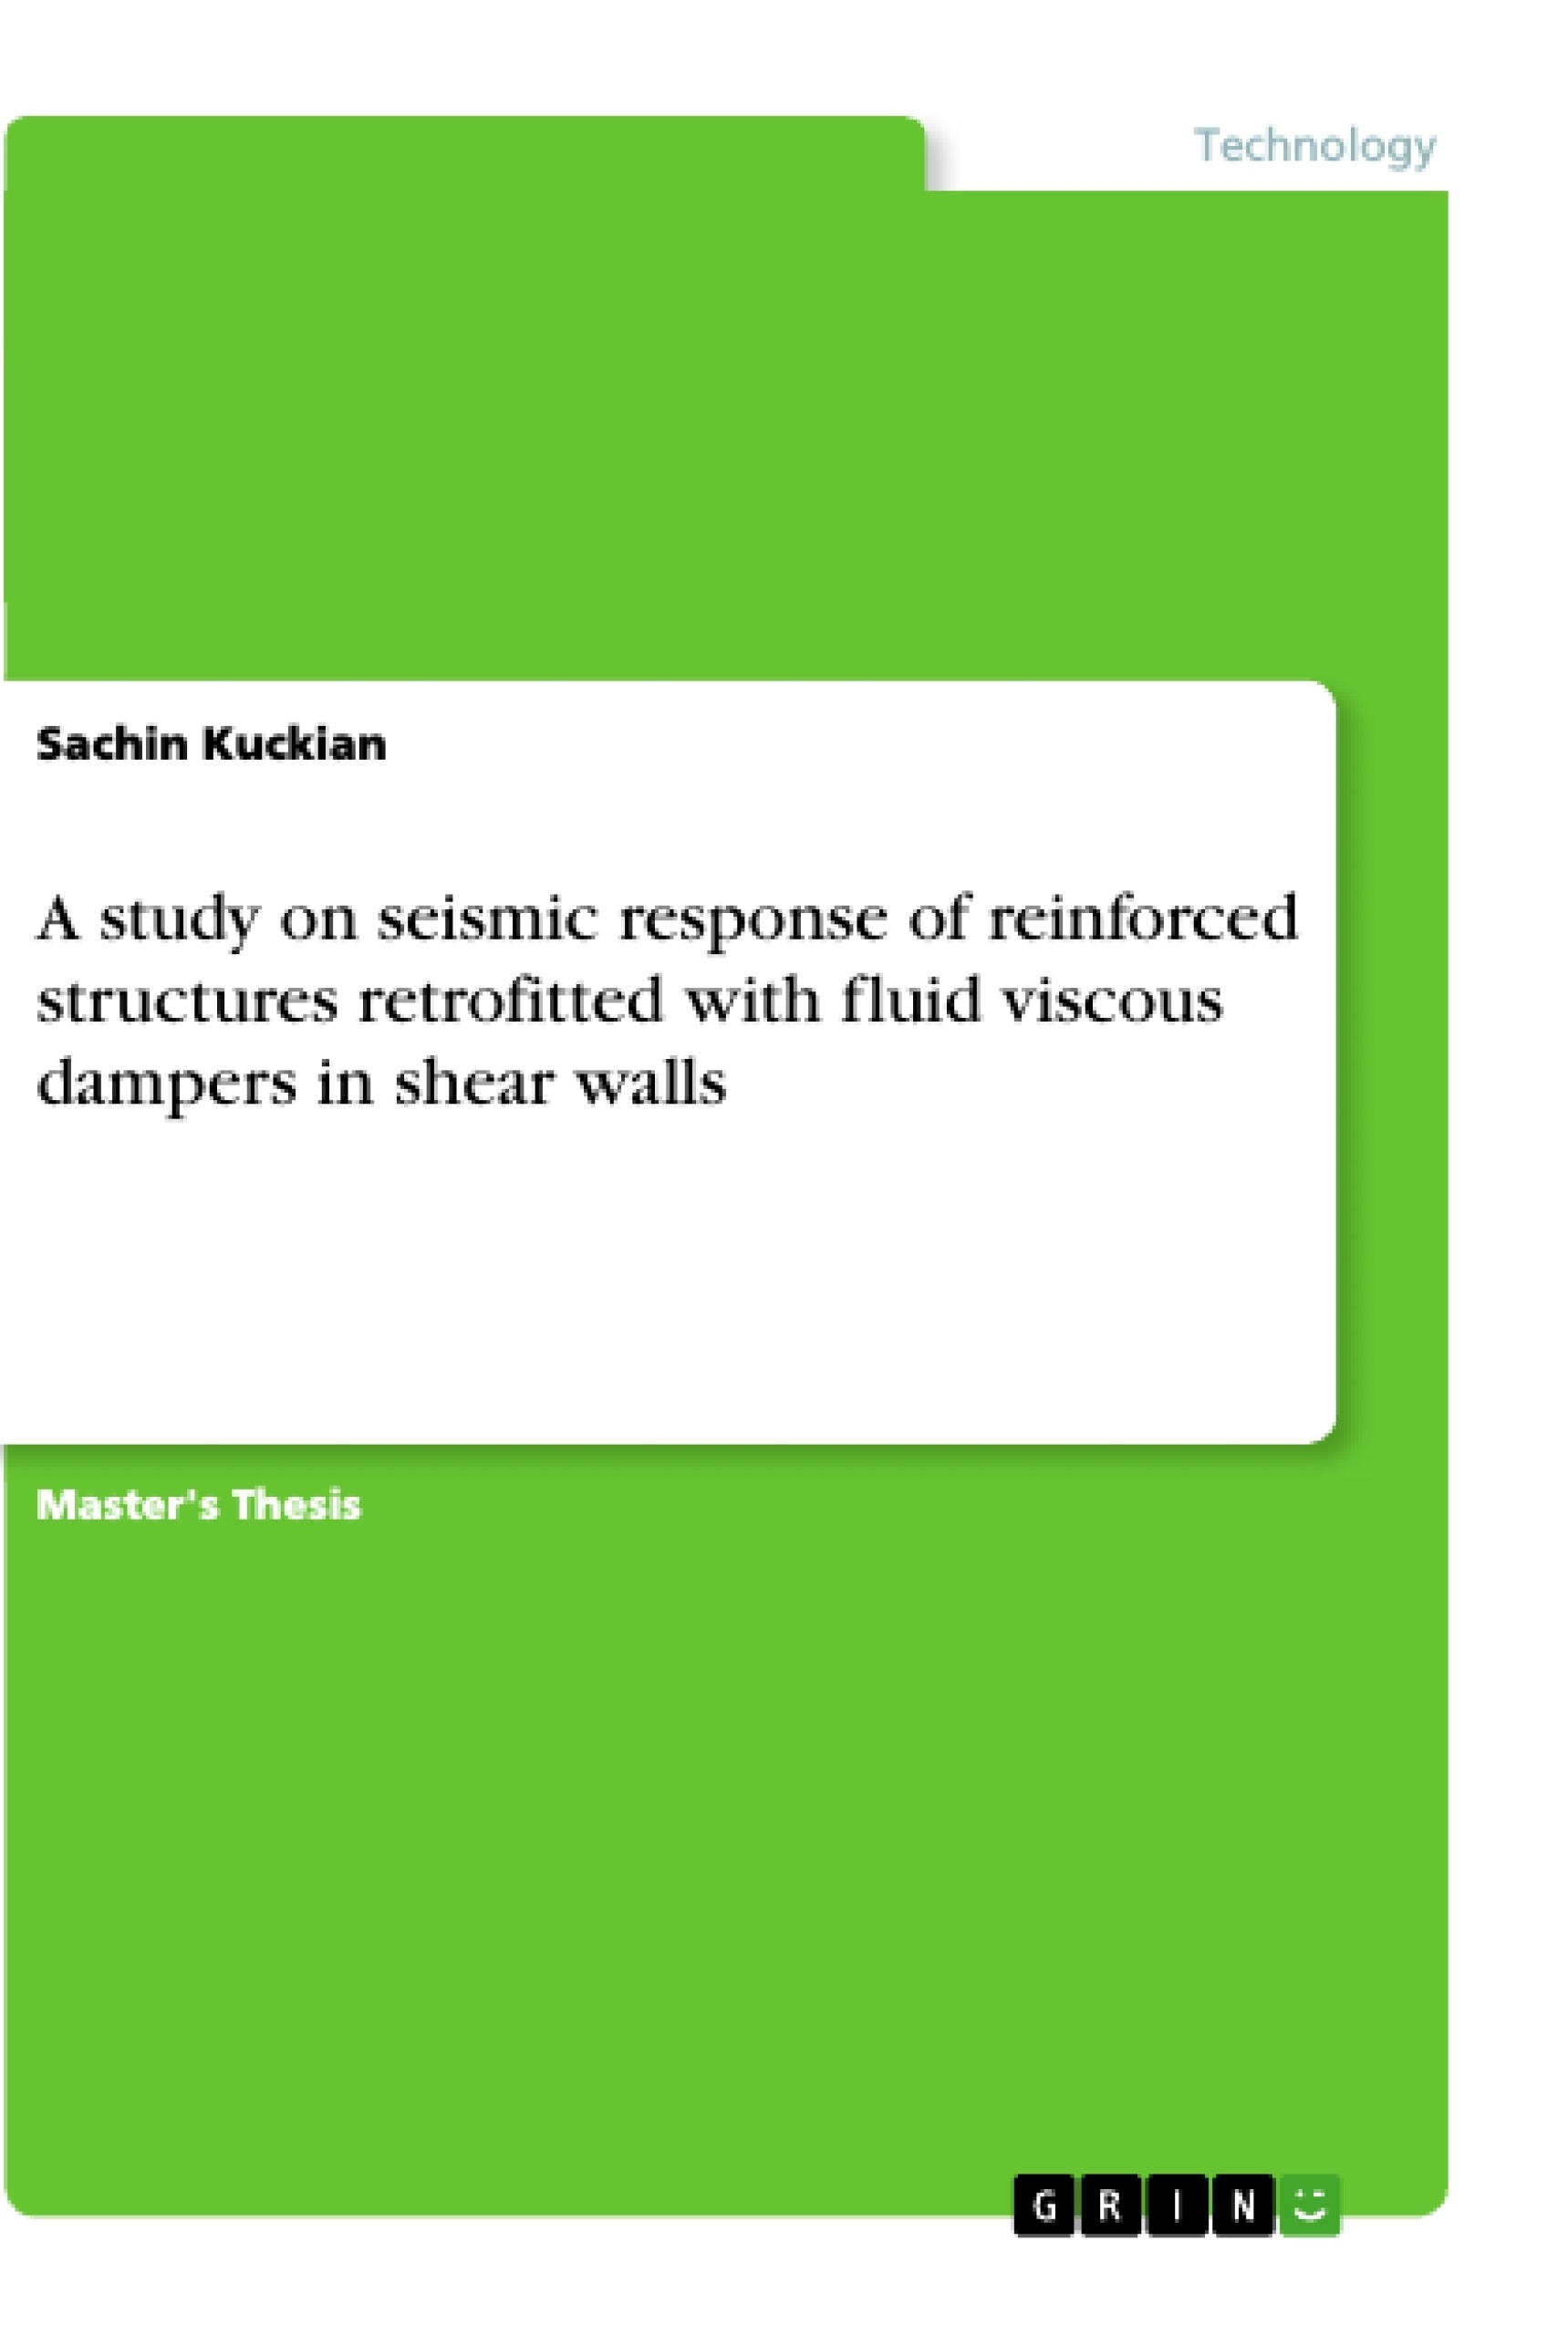 Titre: A study on seismic response of reinforced structures retrofitted with fluid viscous dampers in shear walls